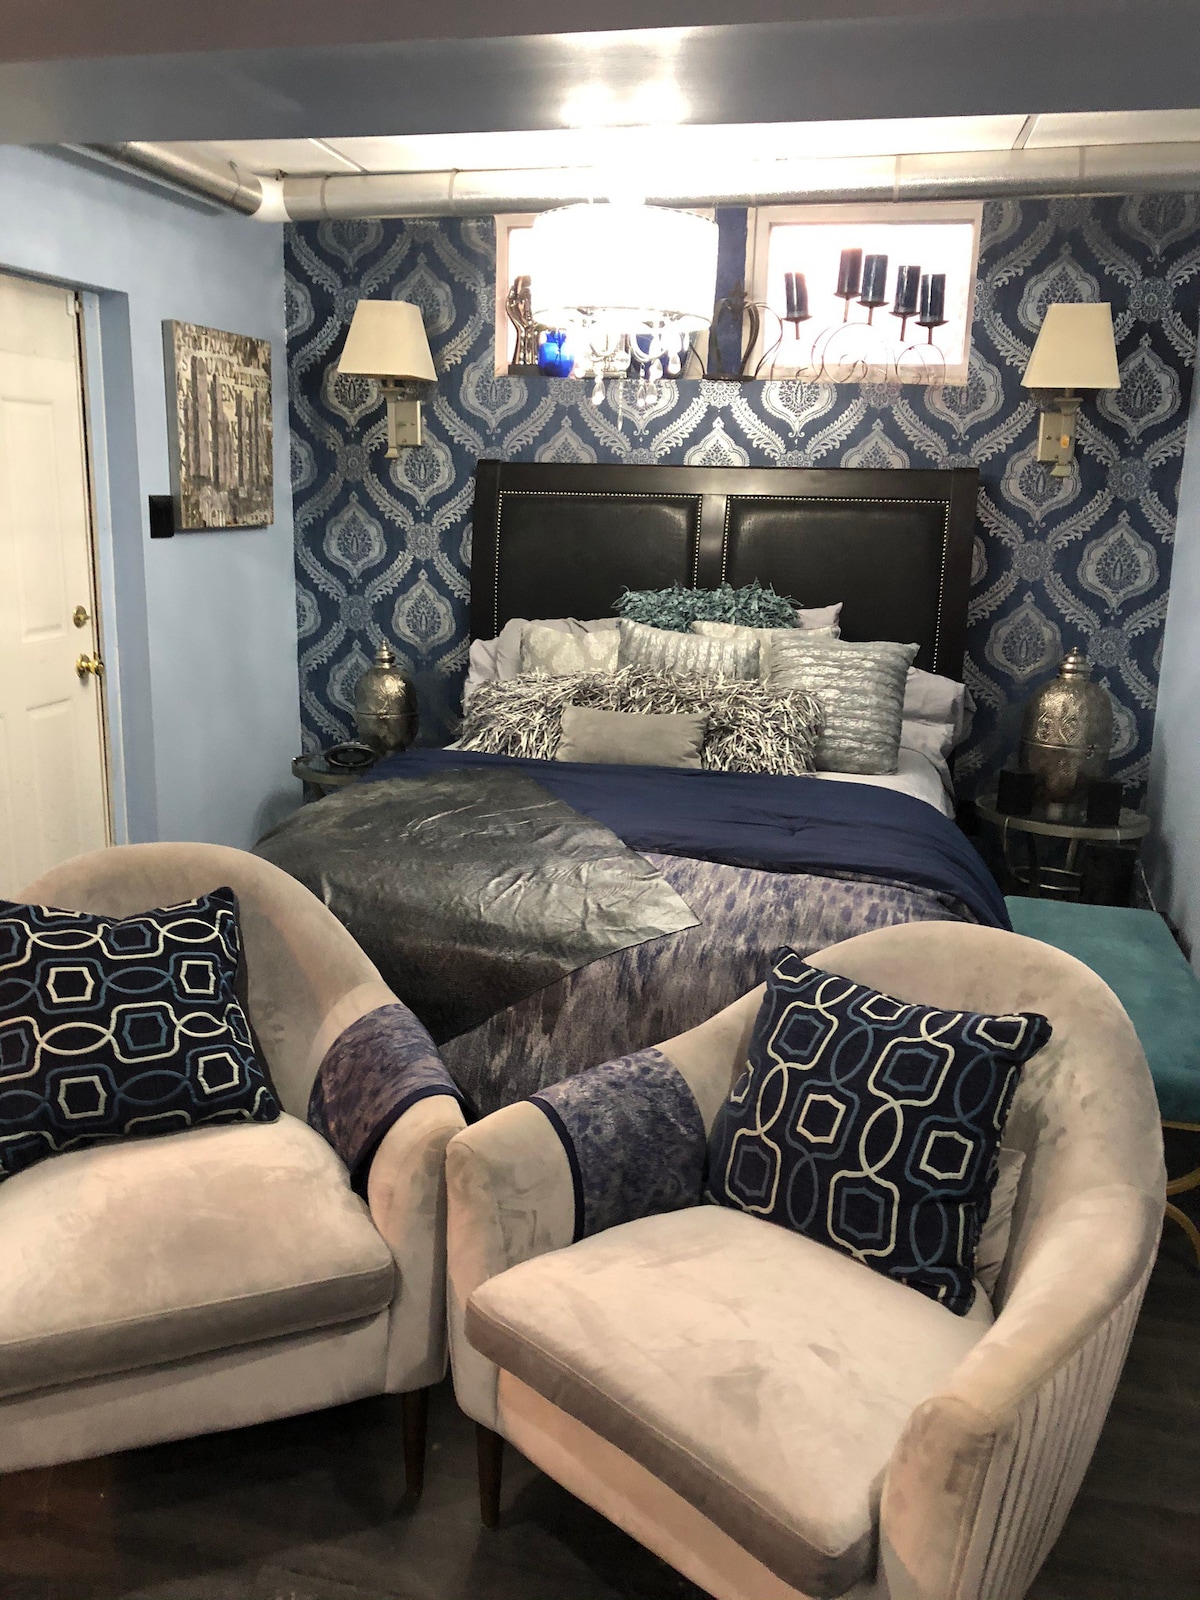 The Cobalt Blue Room at Smith Manor